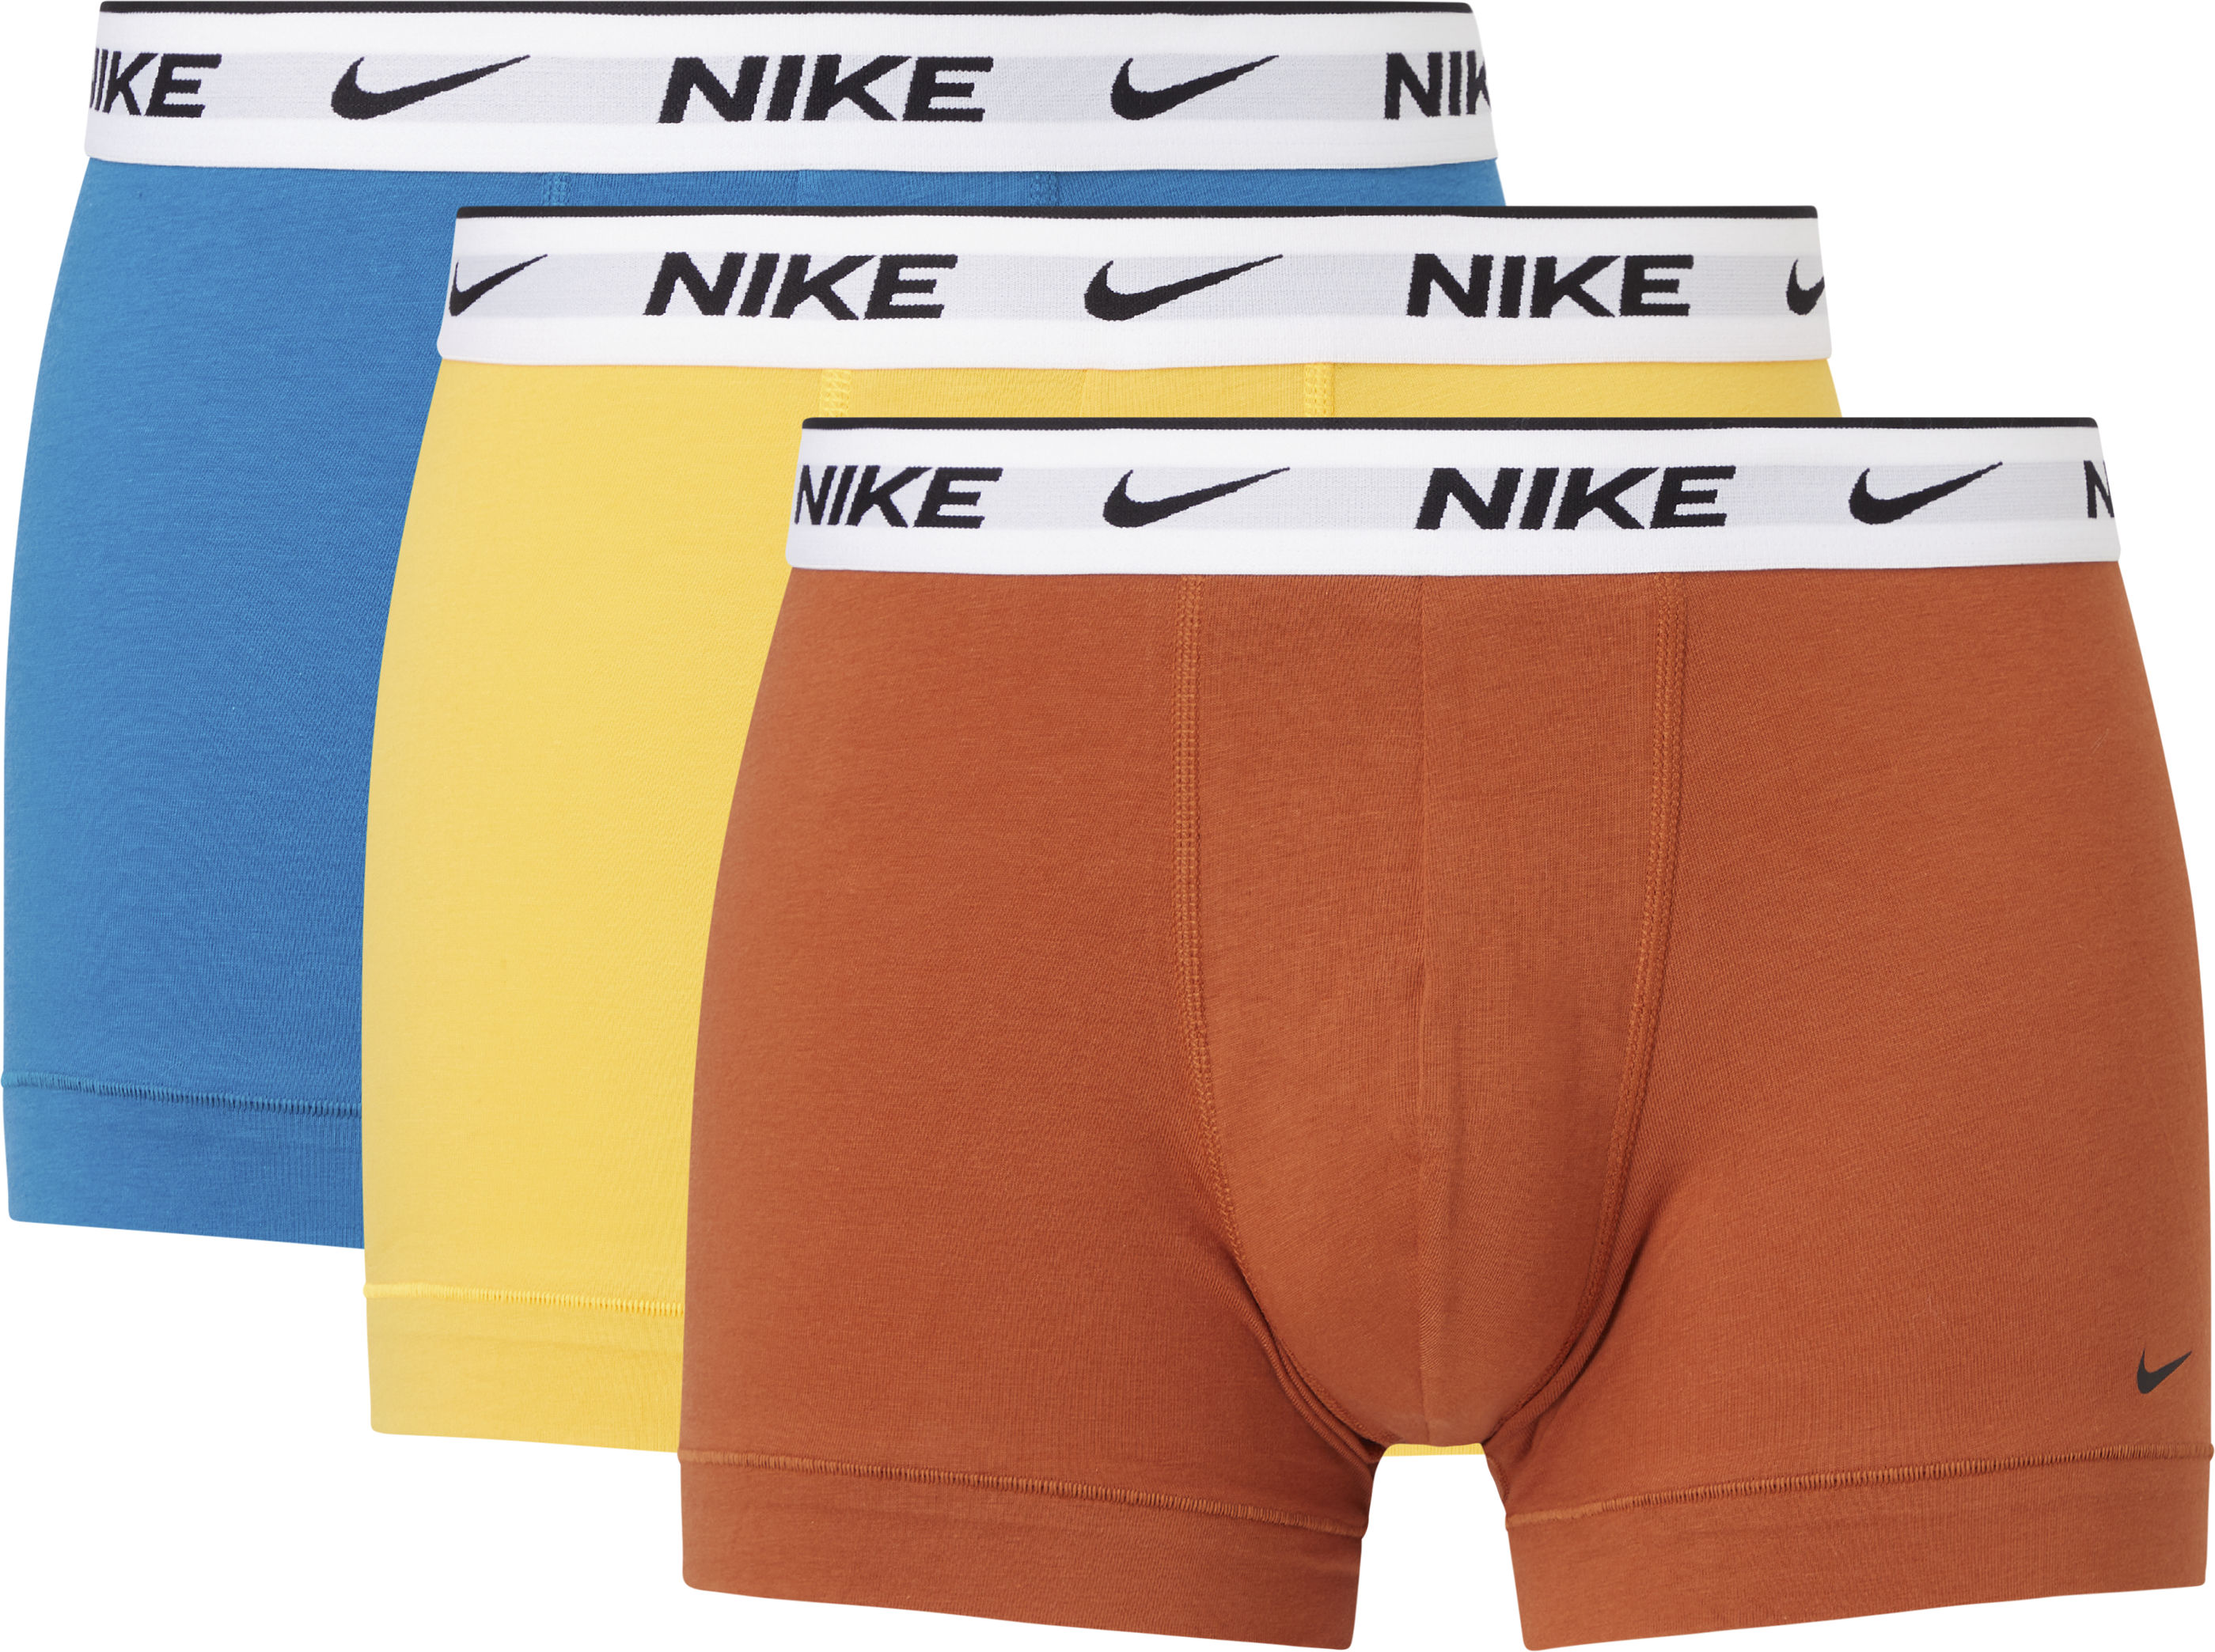 Boxers Nike Everyday Cotton Stretch